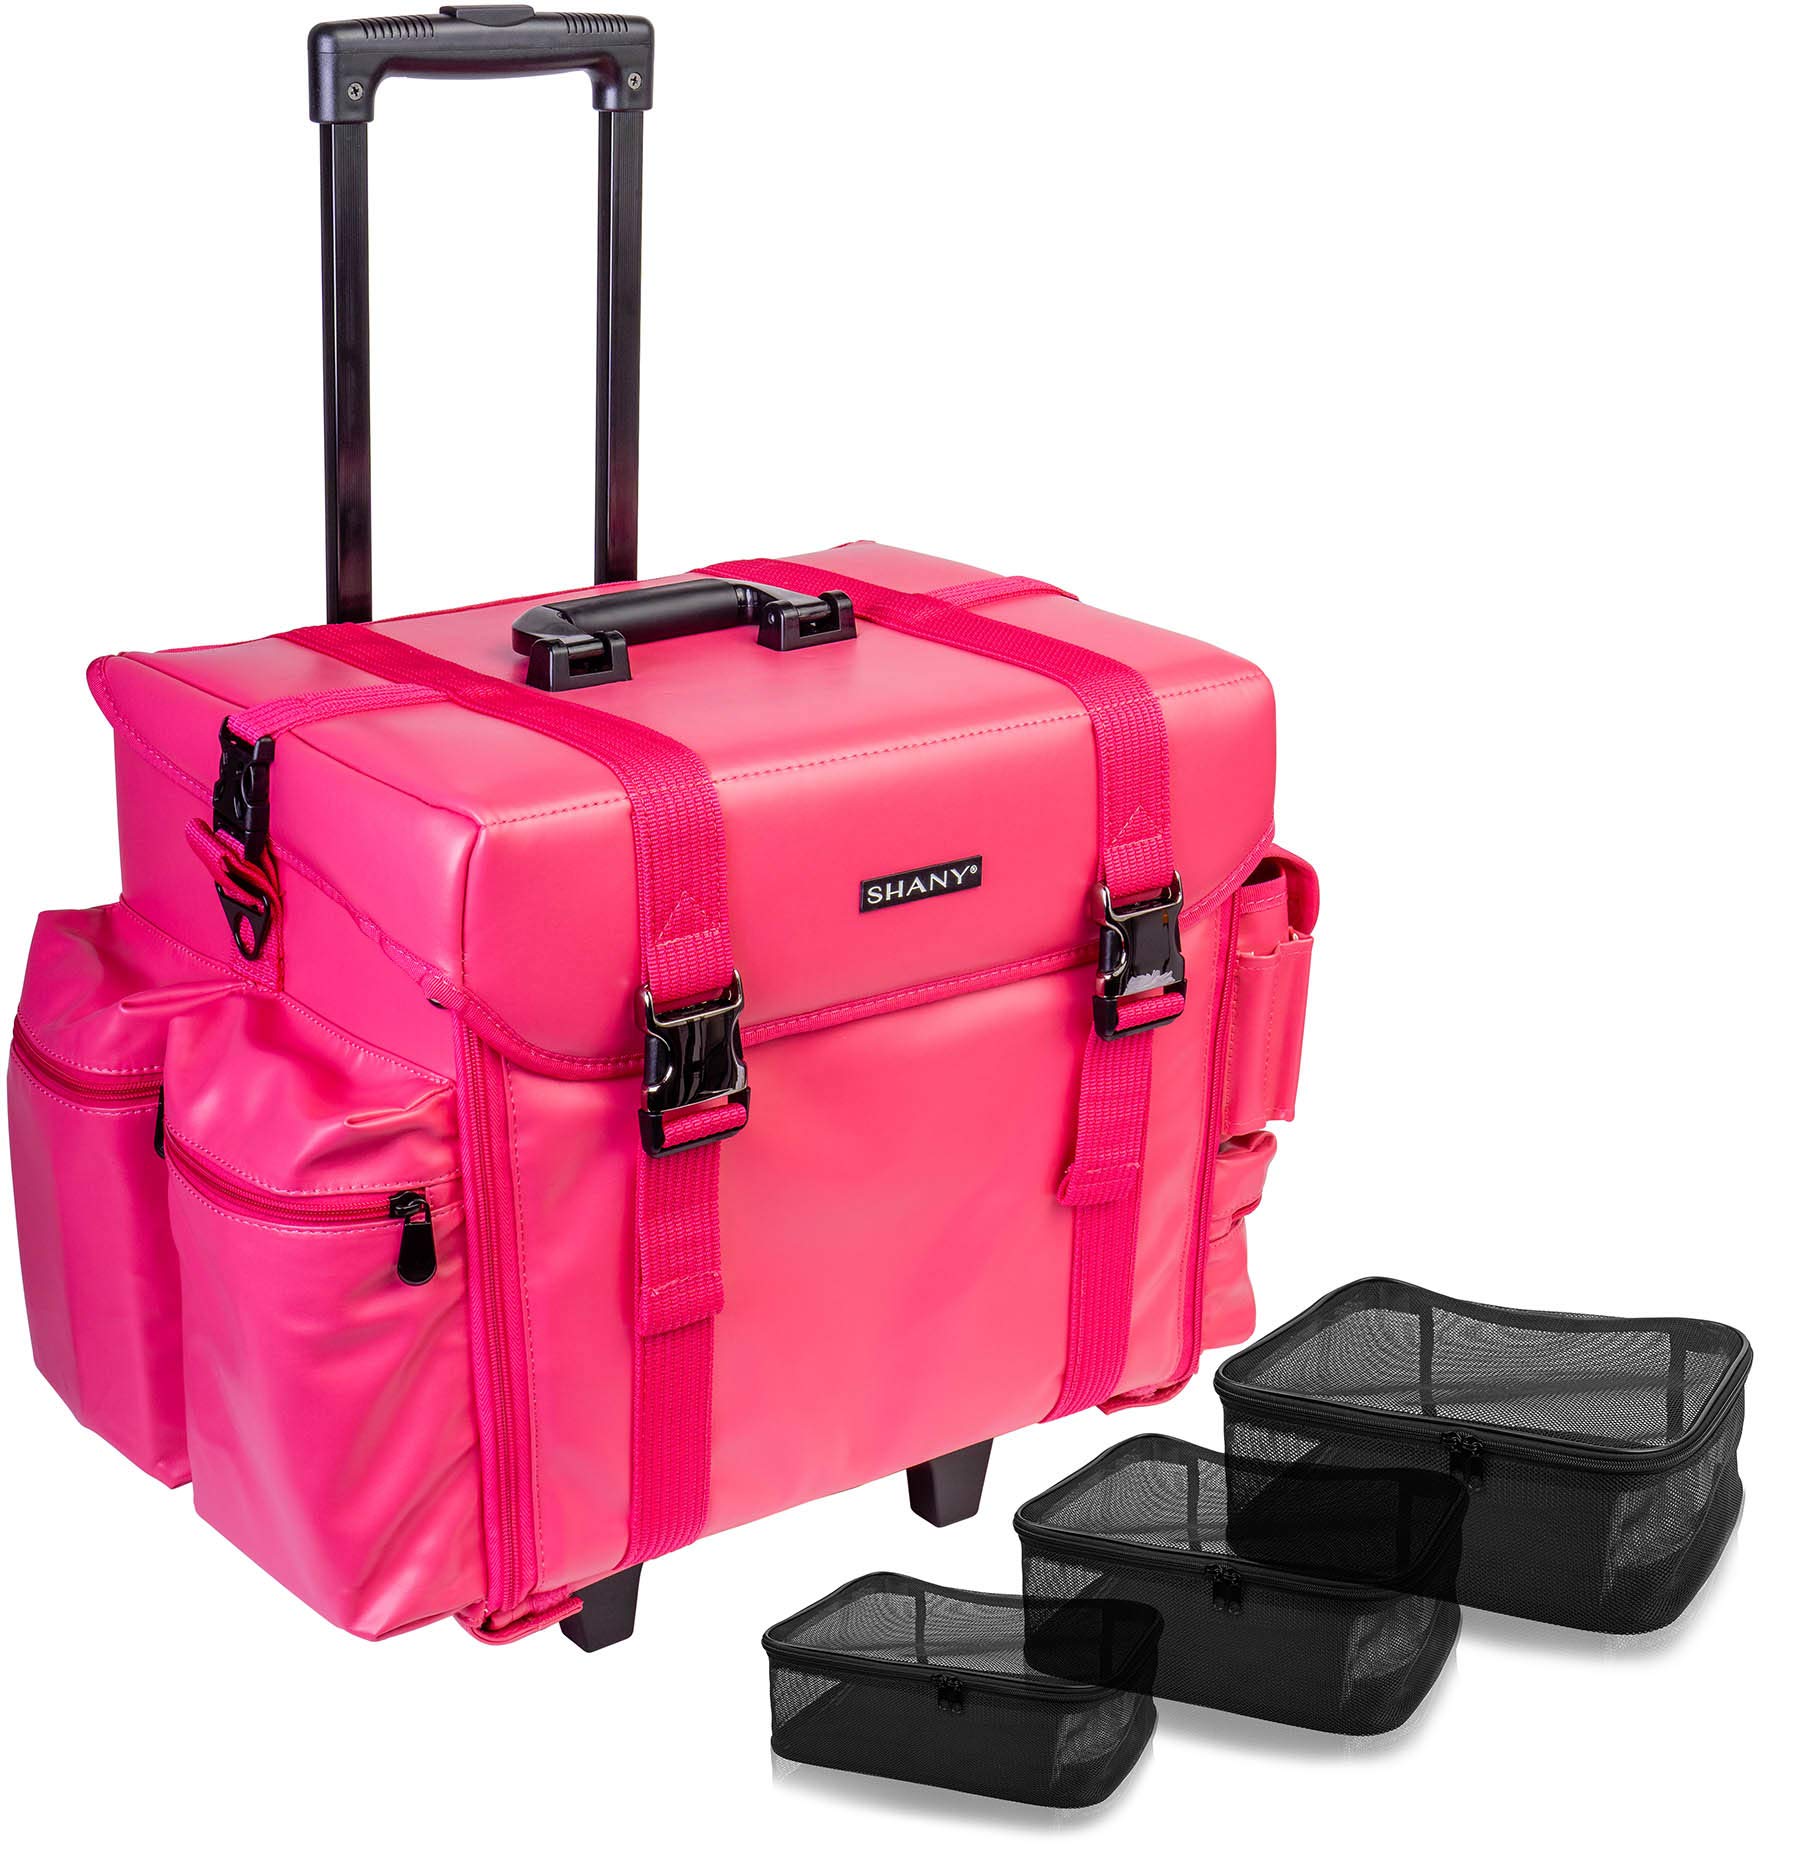 SHANY Makeup Artist Soft Rolling Trolley Cosmetic Case with Free Set of Mesh Bags - Sweetheart